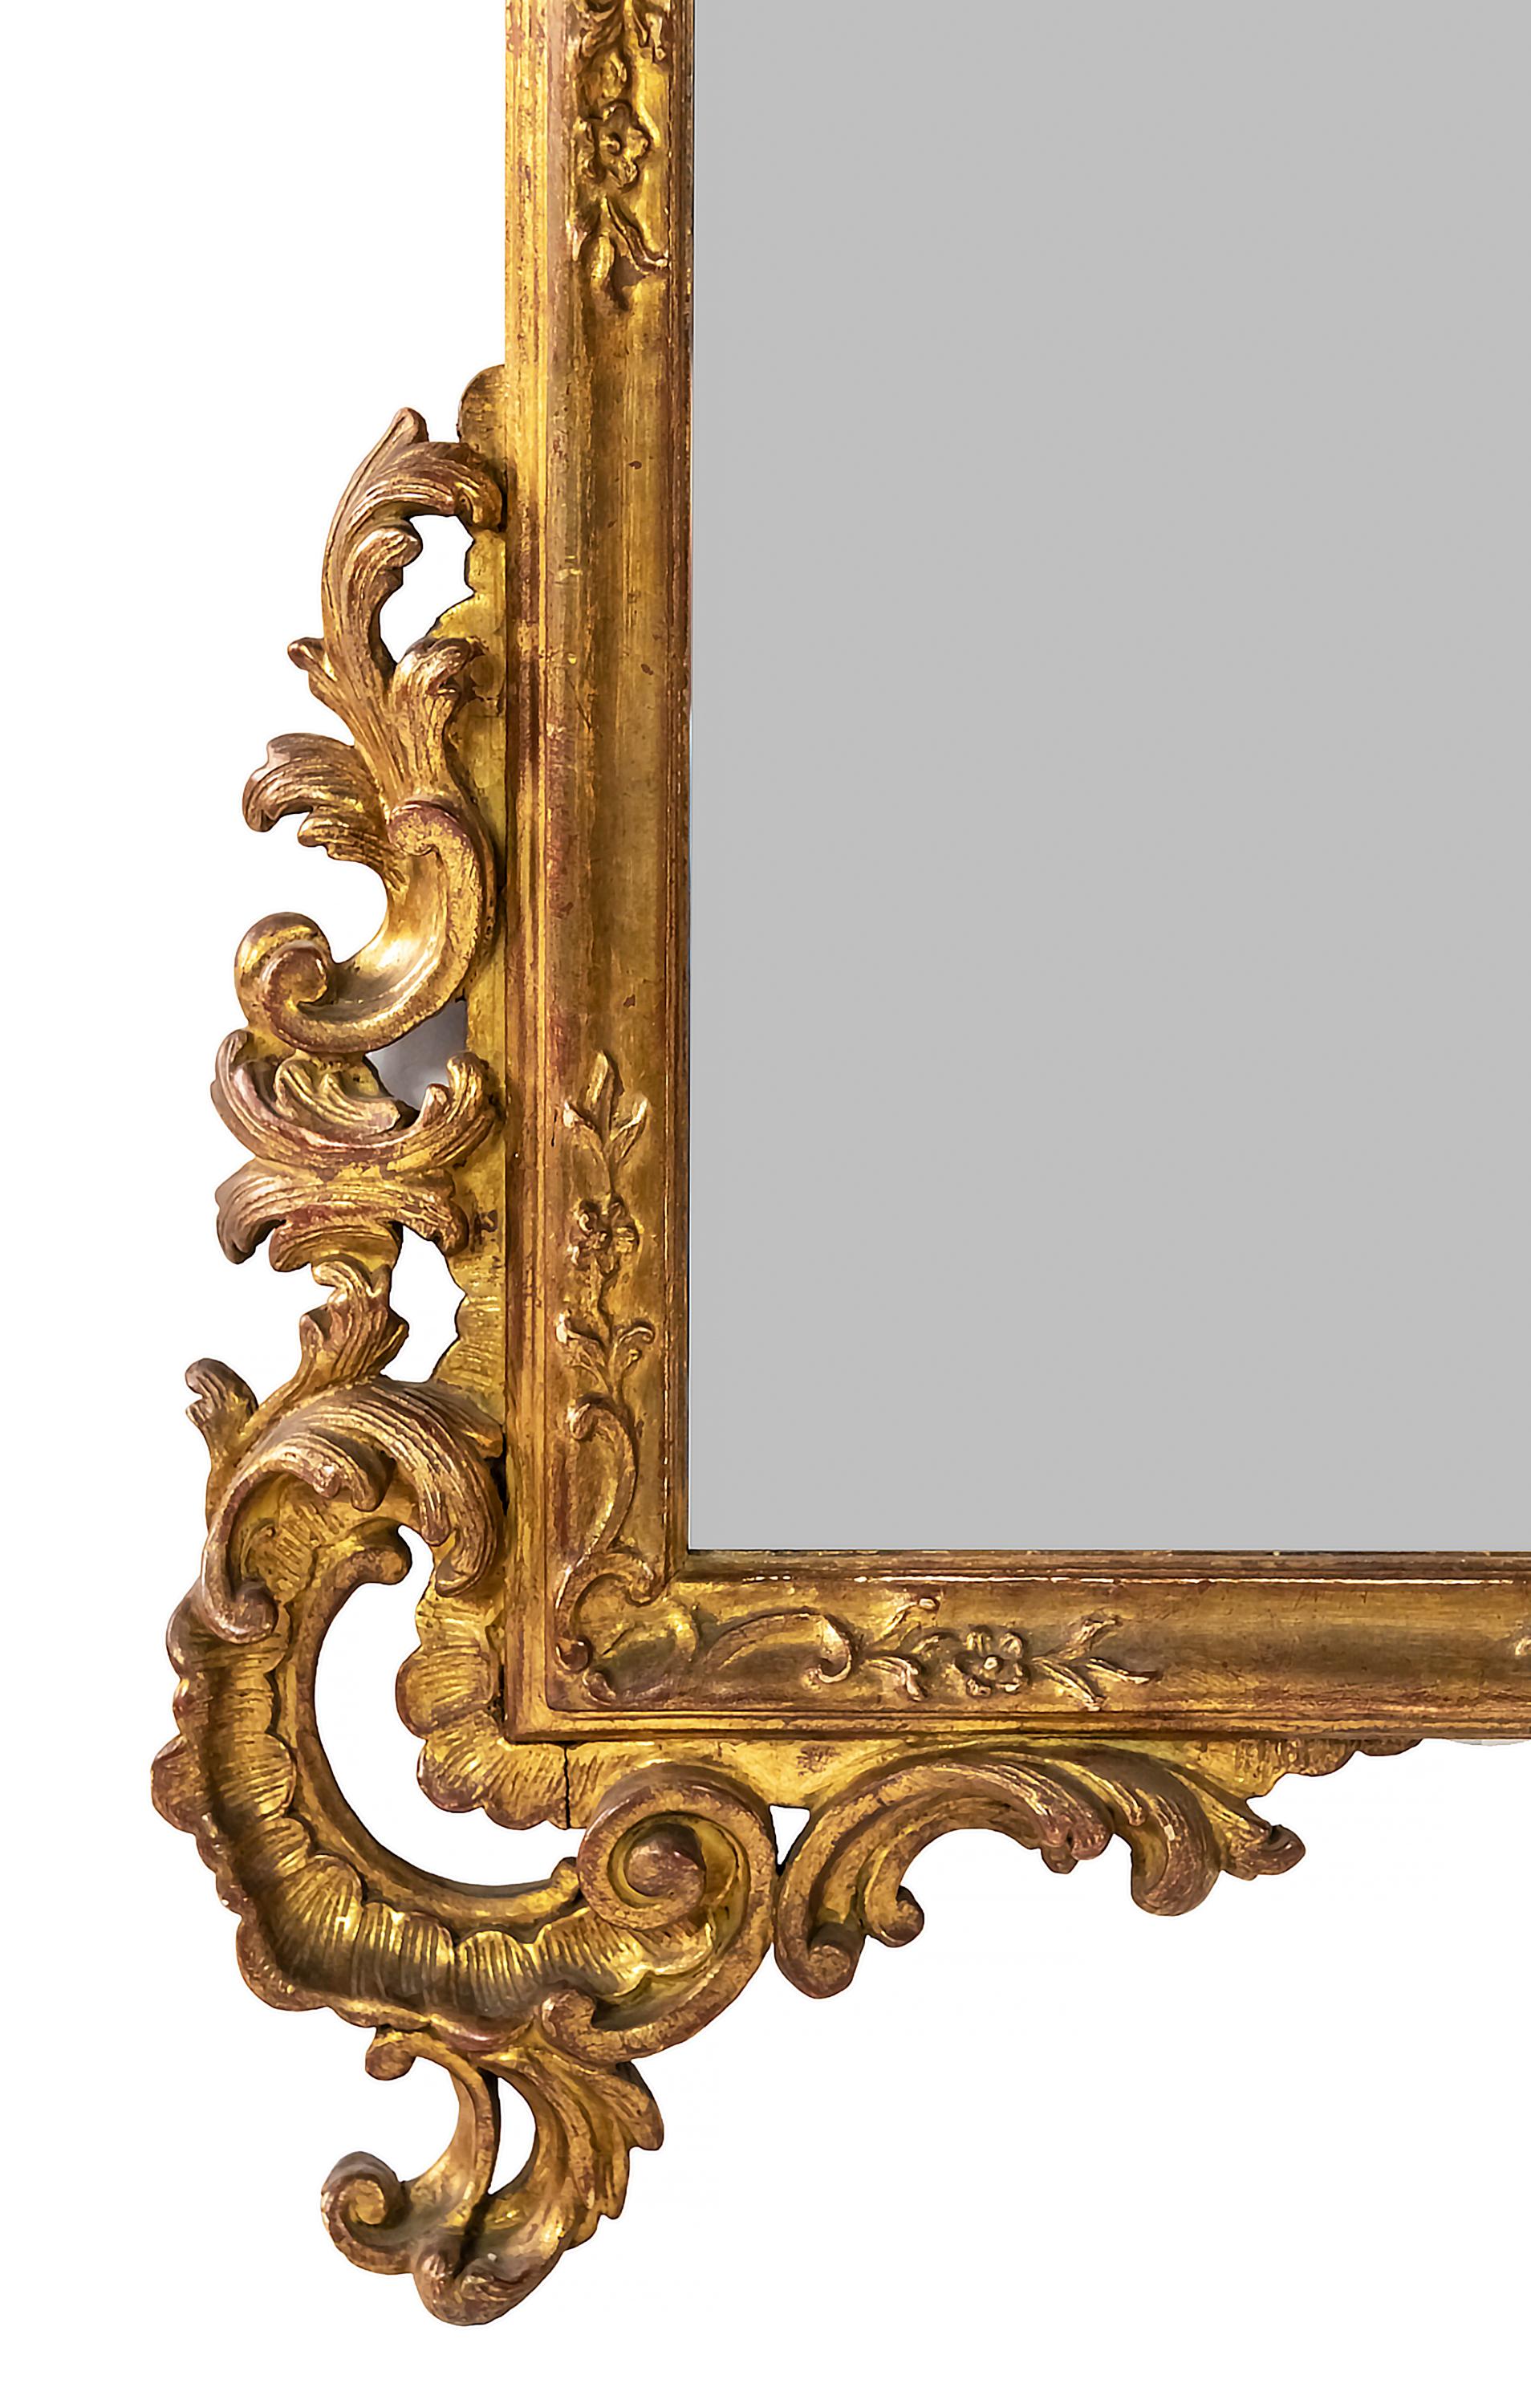 Early 20th Century Antique Italian Hand-Carved Gilt Wood Wall Mirror